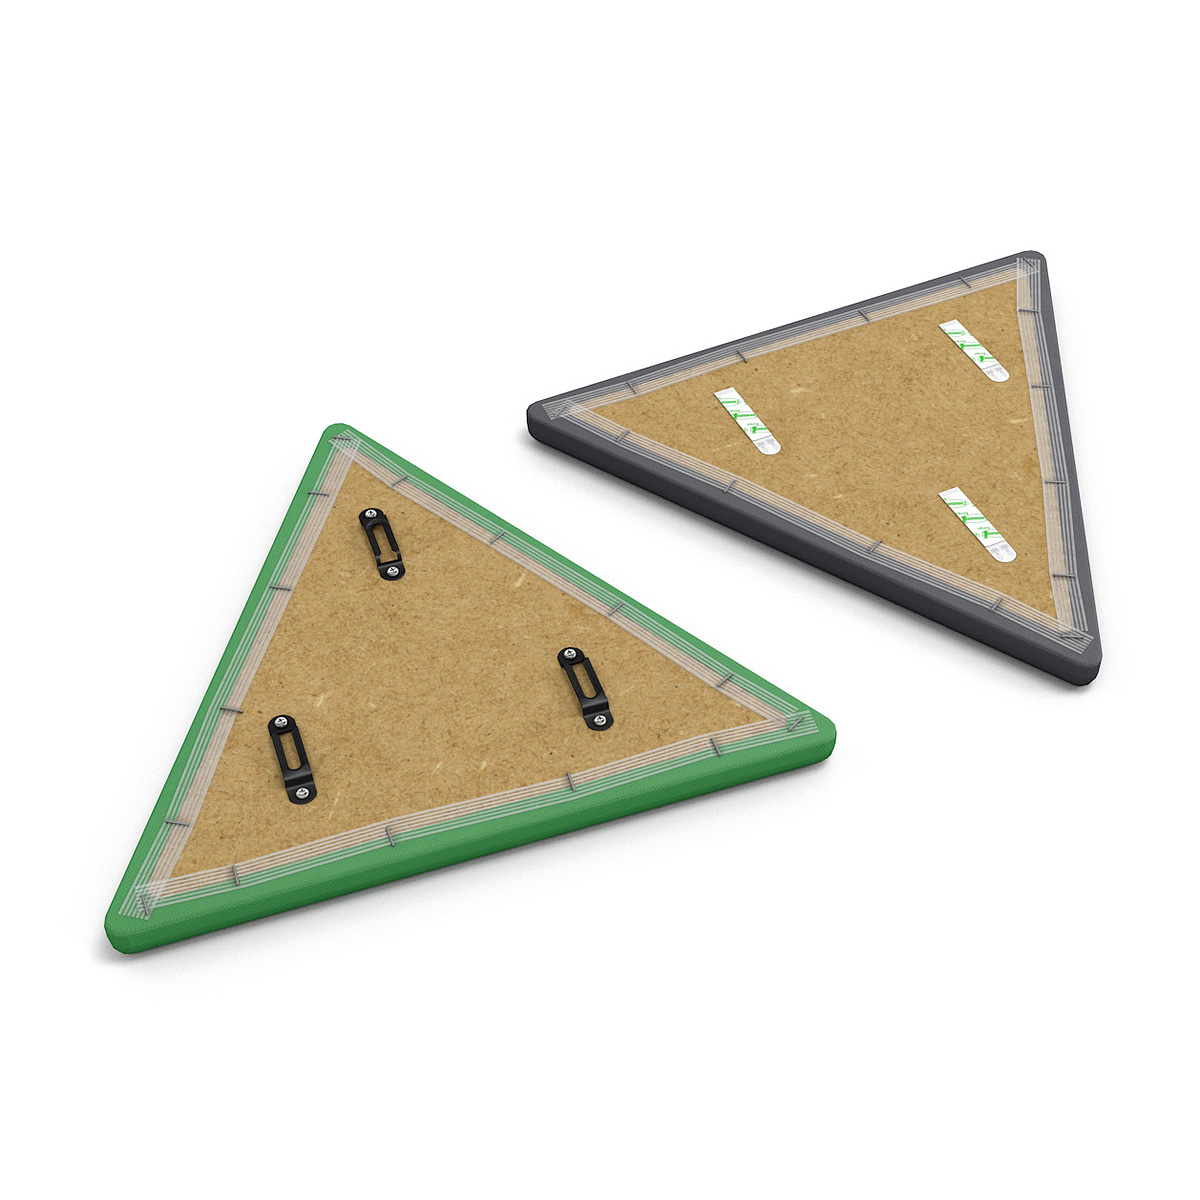 VIRAGE™ Triangular Acoustic Panels Have Two Easy-Fix Options - Keyhole Brackets or 3M Command Velcro Strips